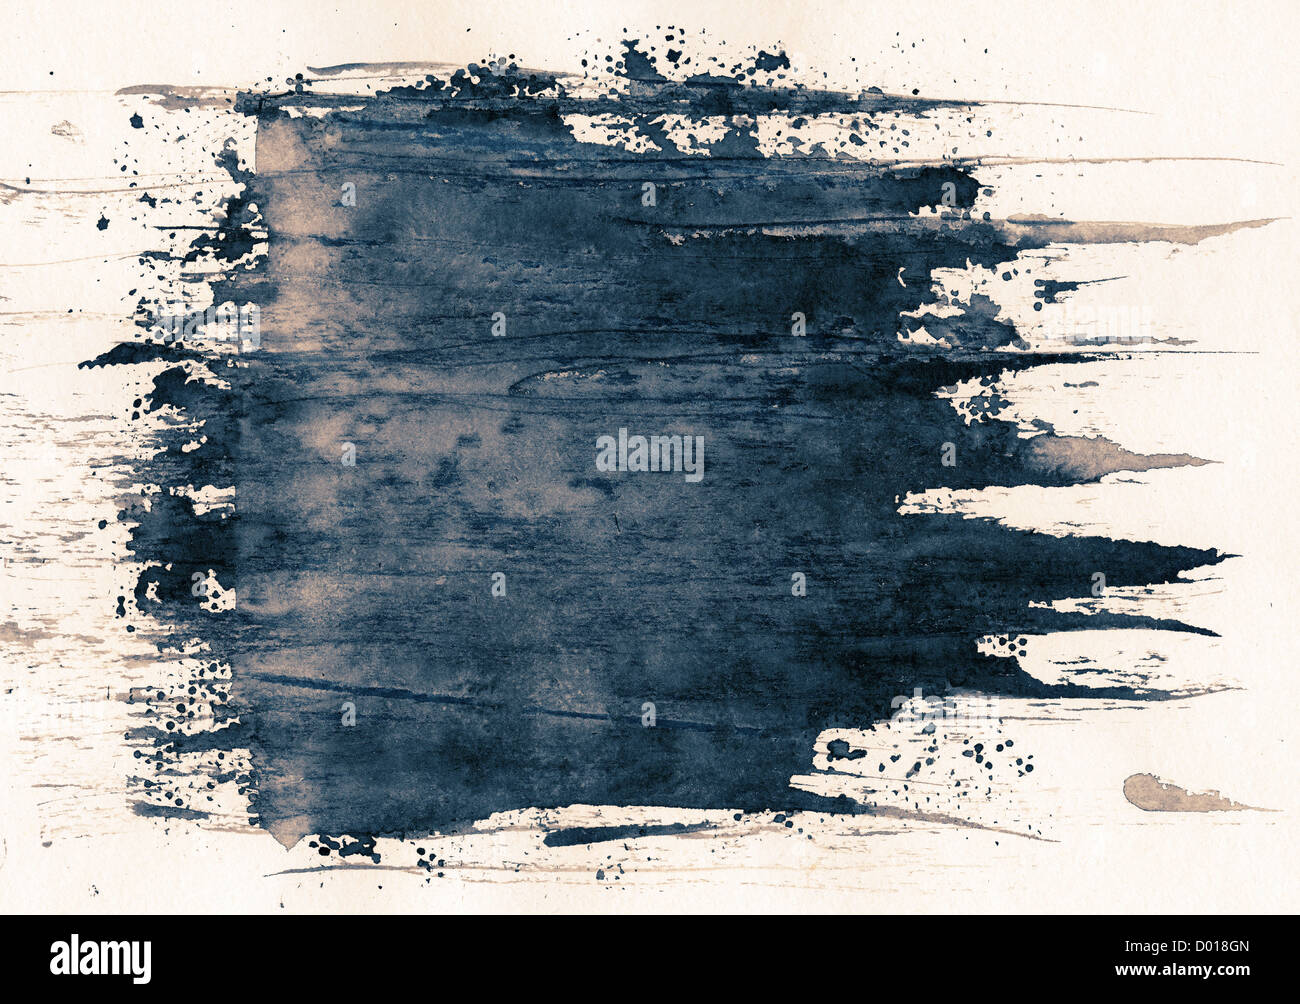 Abstract painted grunge background, ink texture. Stock Photo